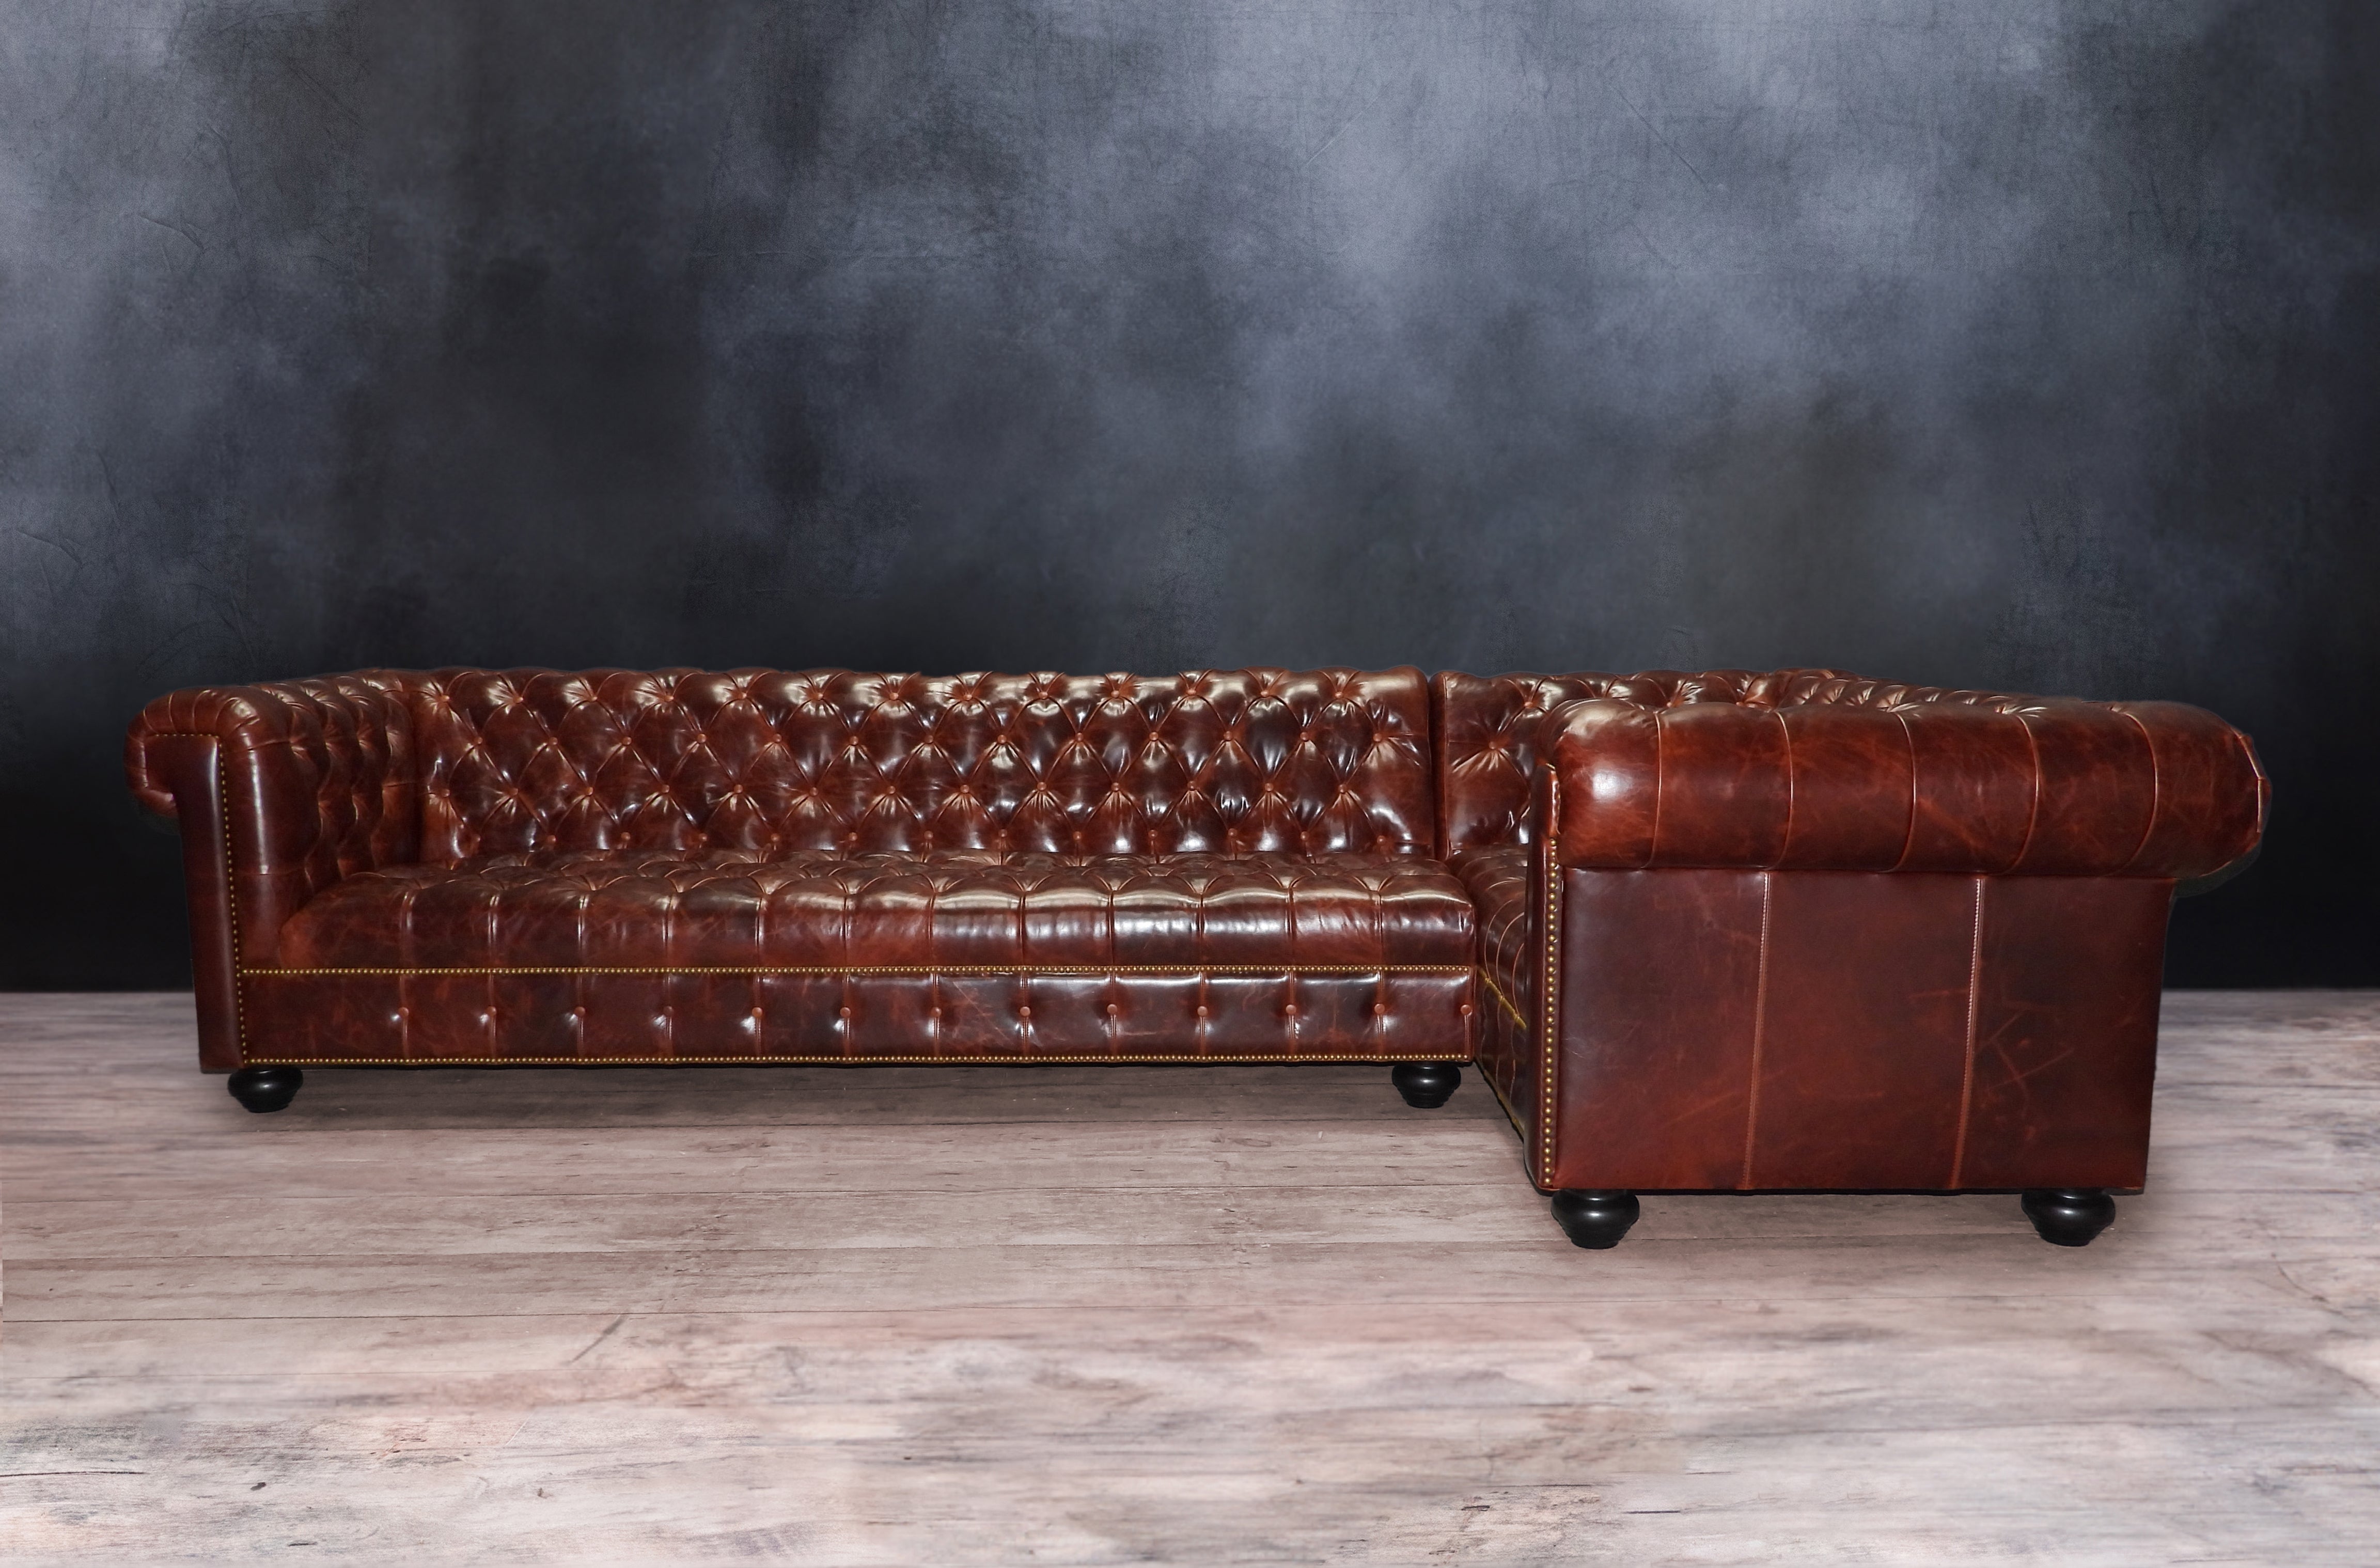 KING RICHARD LEATHER SECTIONAL